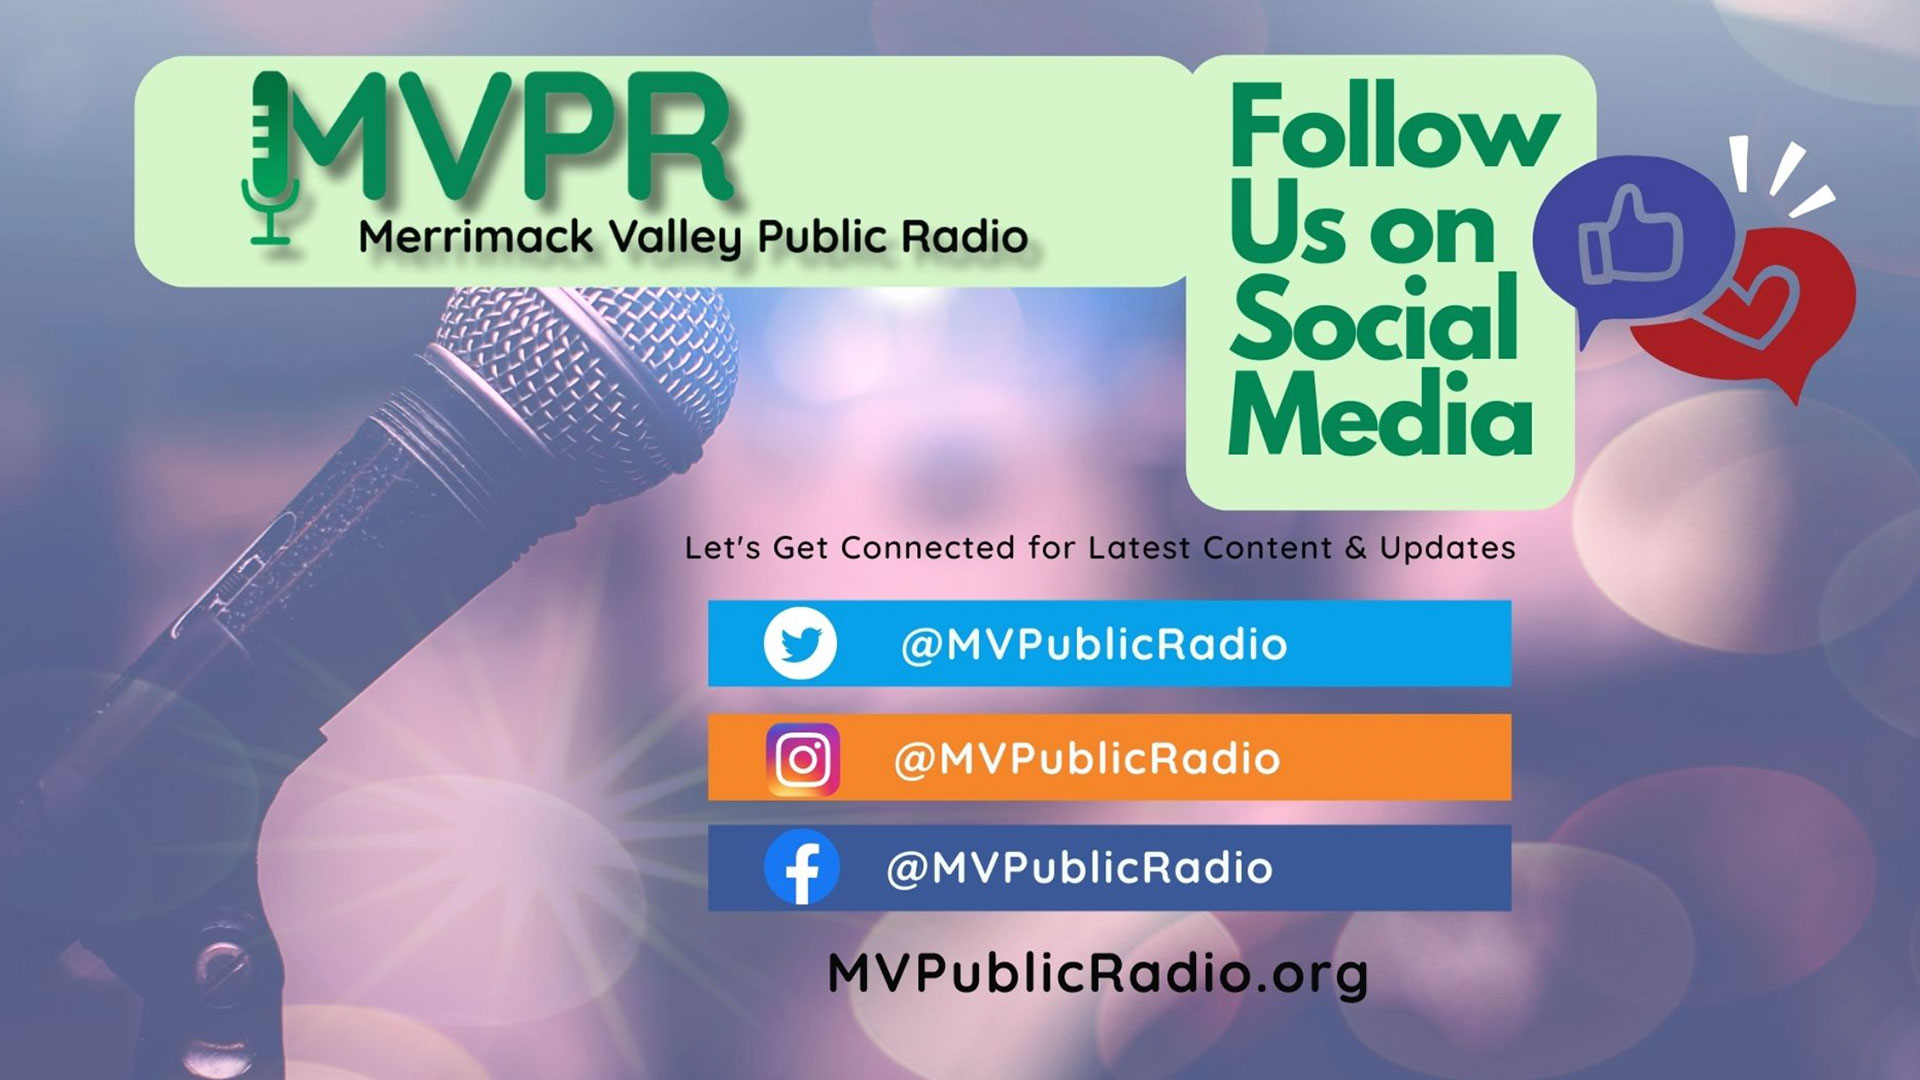 On Sunday, July 16 at noon, the Merrimack Valley will have a new sound. Merrimack Valley Public Radio will premier with a special block of programming to introduce the idea of this new audio-only offering on the internet.